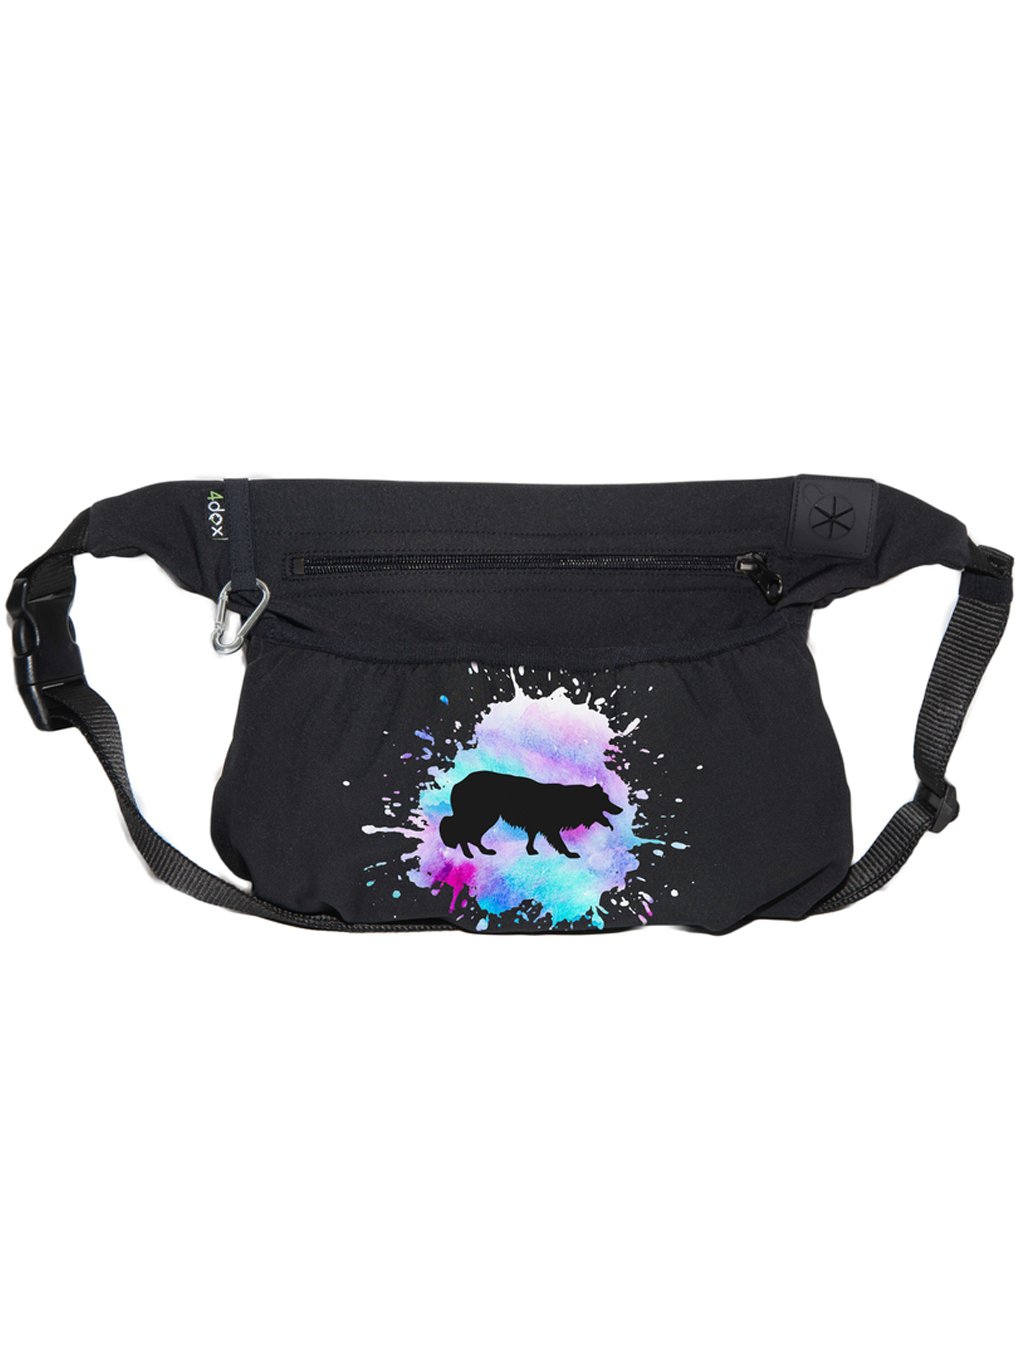 Treat pouch XL 2K Bordercolia longhaired BC2 4dox